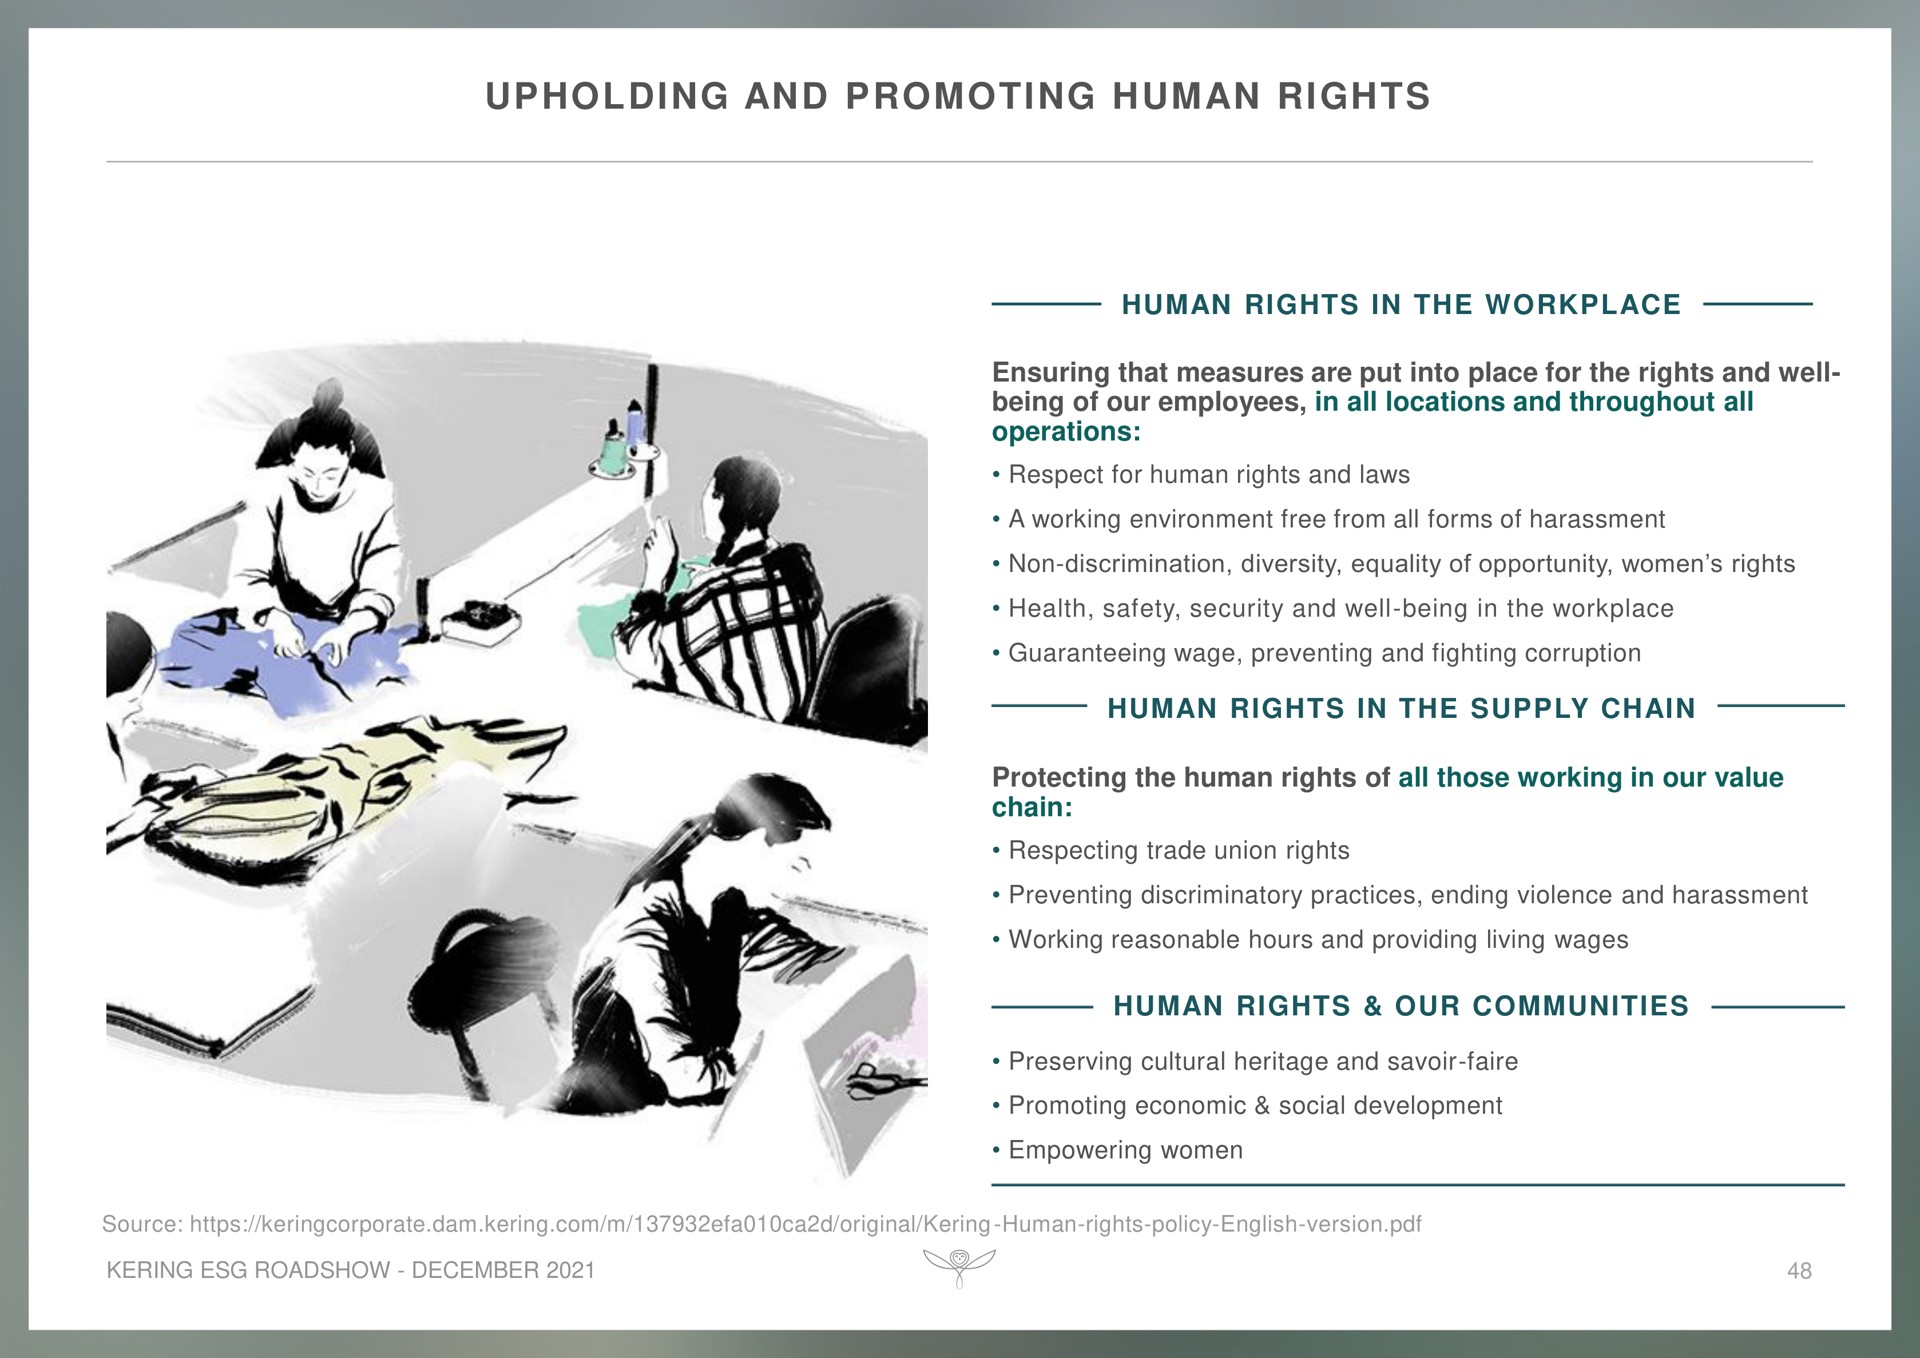 upholding and promoting human rights | Kering